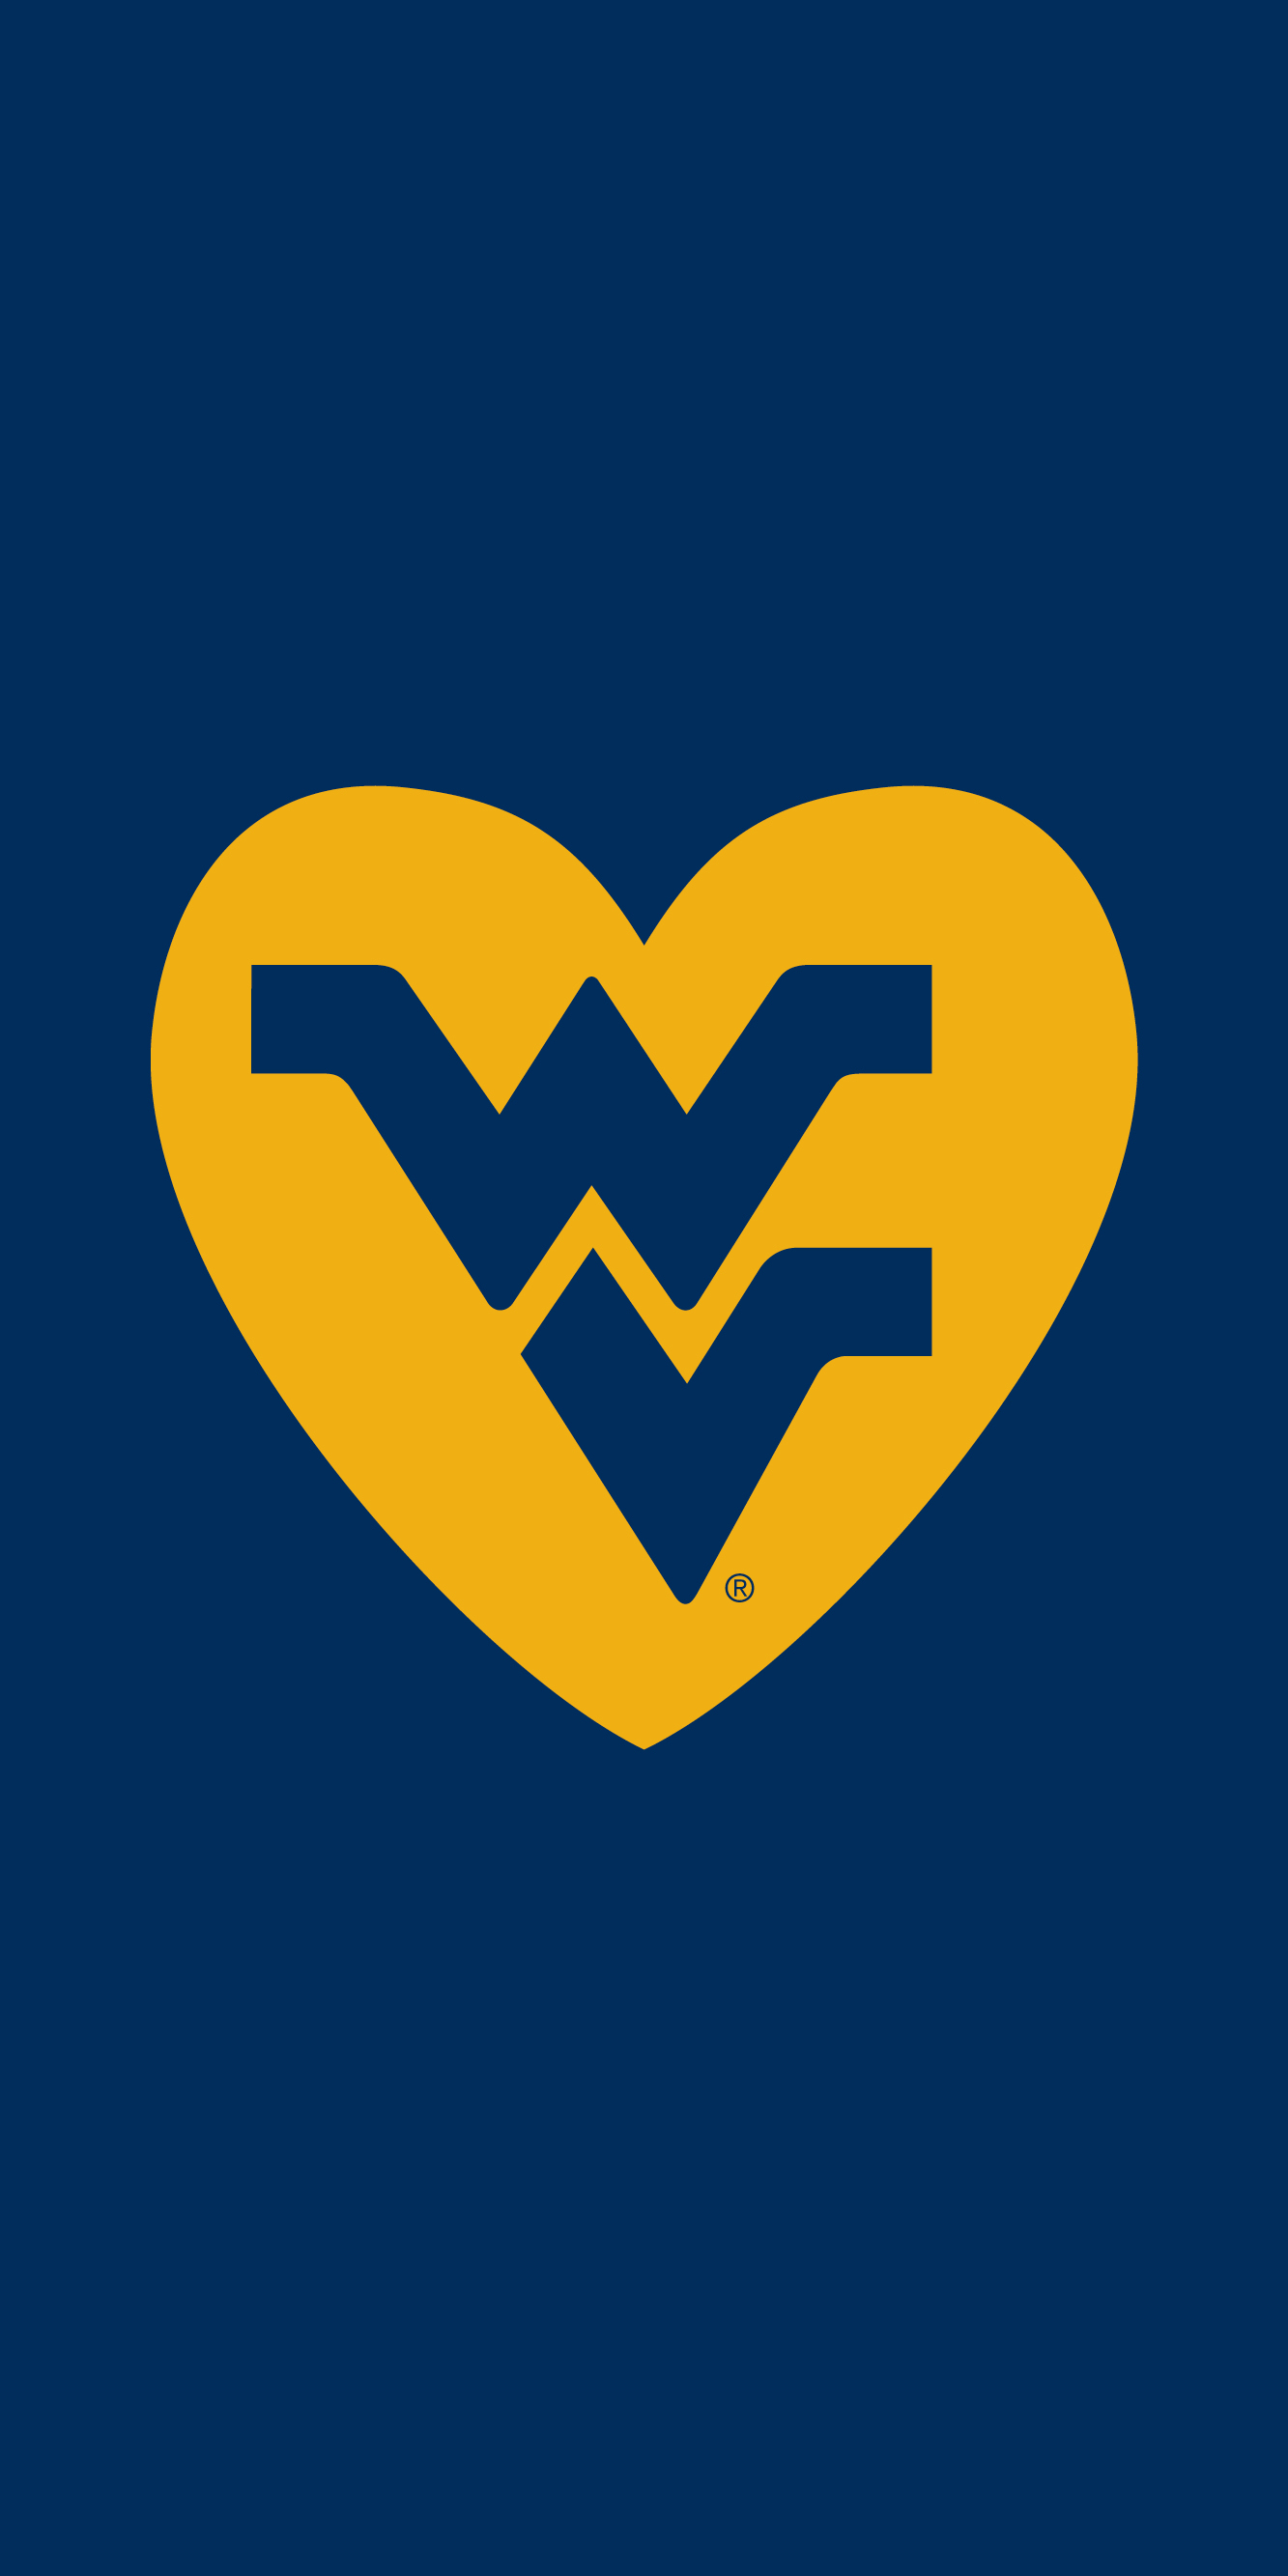 1333x2667 Social Media Center | WVU Potomac State College | Admissions | West Virginia University